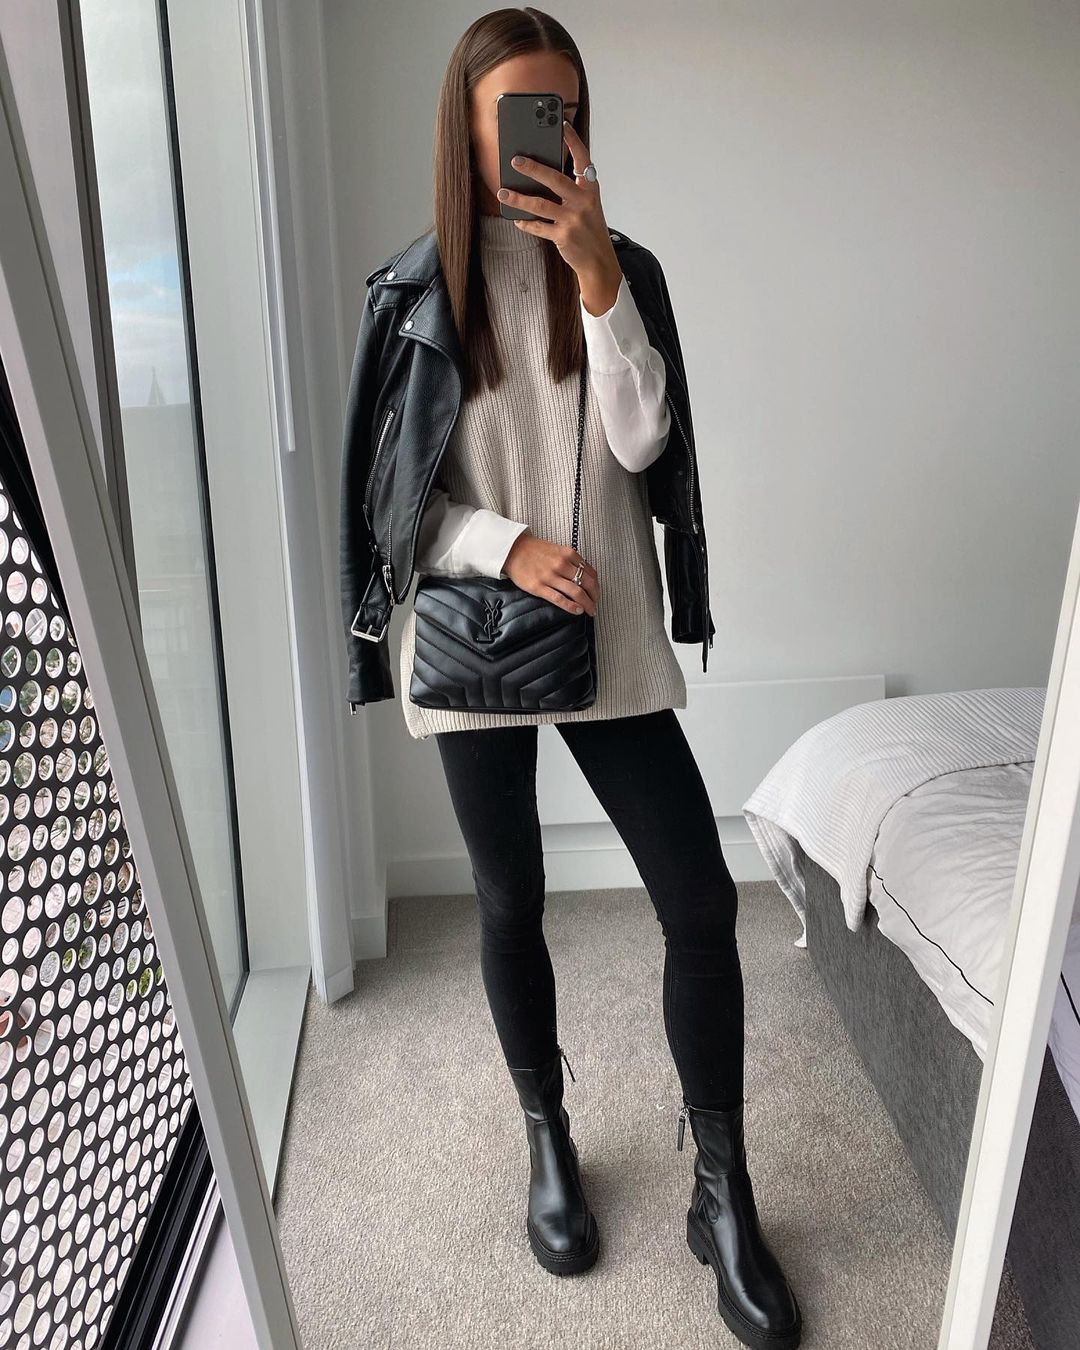 Black Leggings 44 Outfit Ideas For Women To Try Next Week 2020  Outfits  with leggings, Black leather leggings outfit, Leather leggings outfit